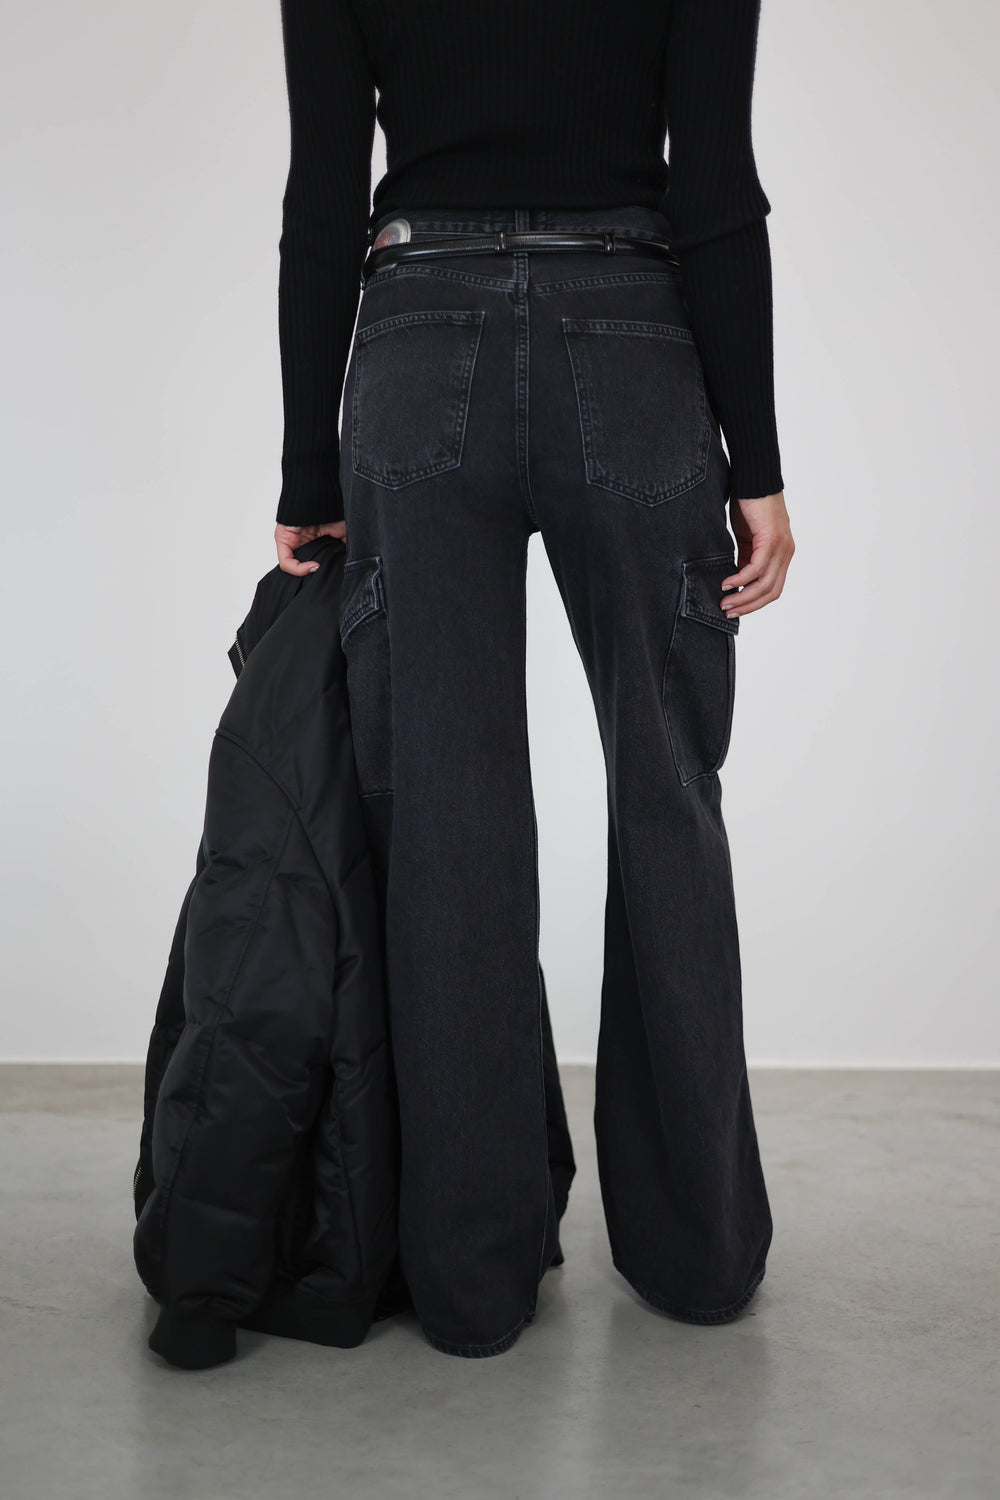 MINKA CARGO JEANS IN SPIDER JEANS AGOLDE 